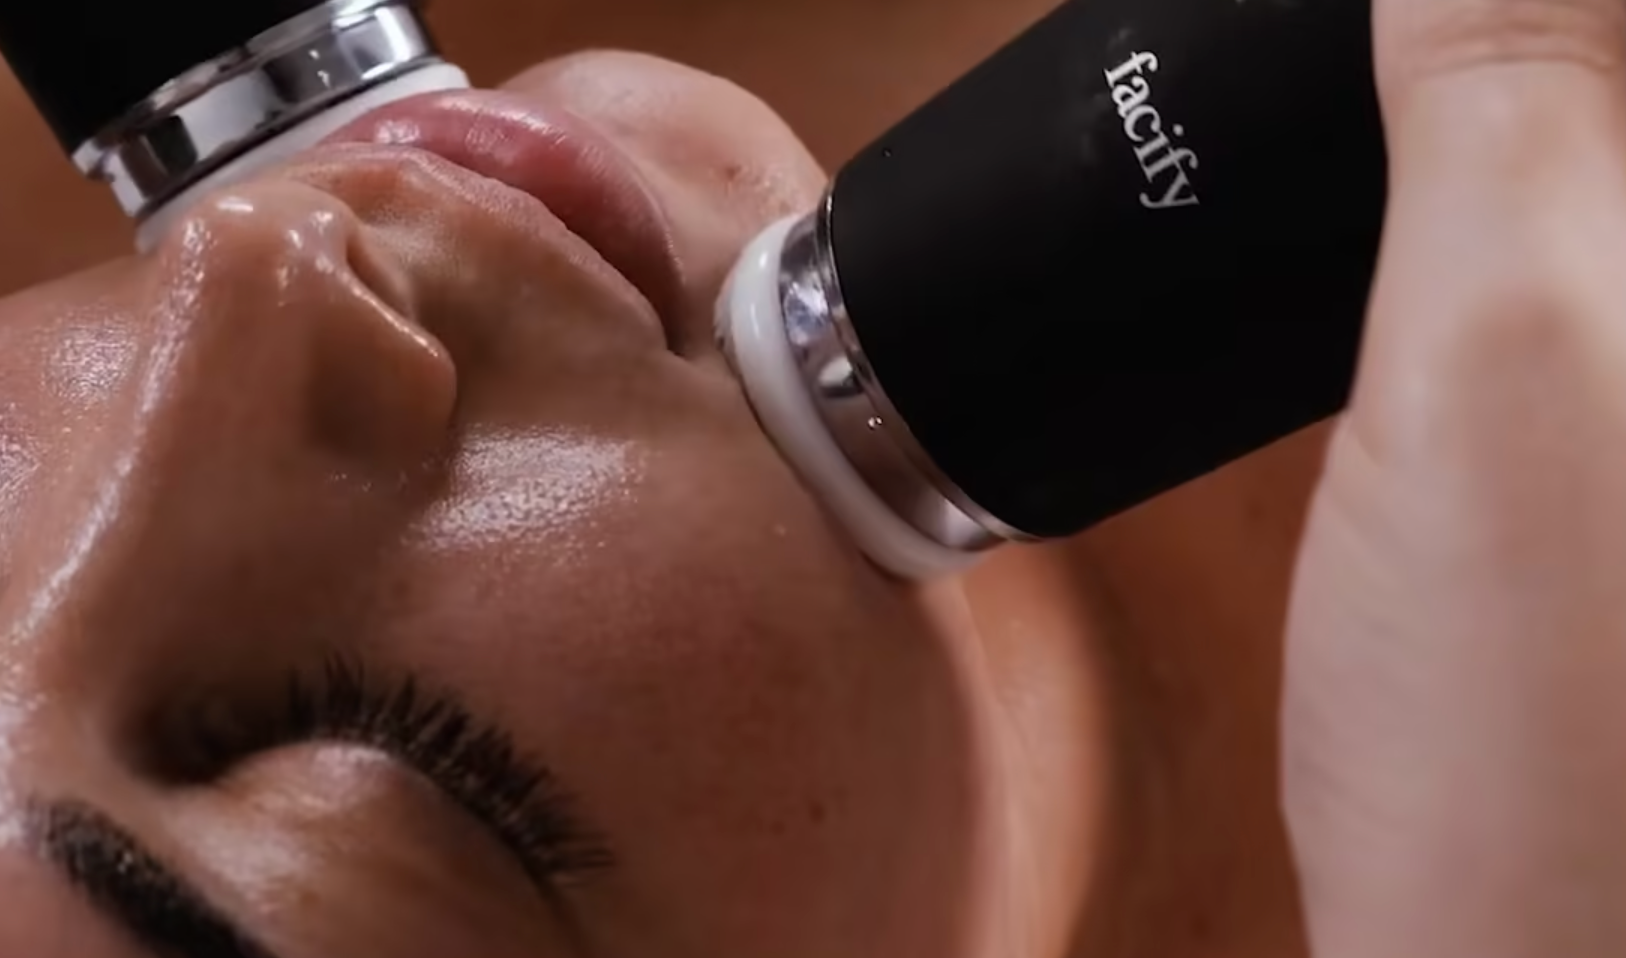 woman receiving a treatment using the cleansing attachment of the facify wand